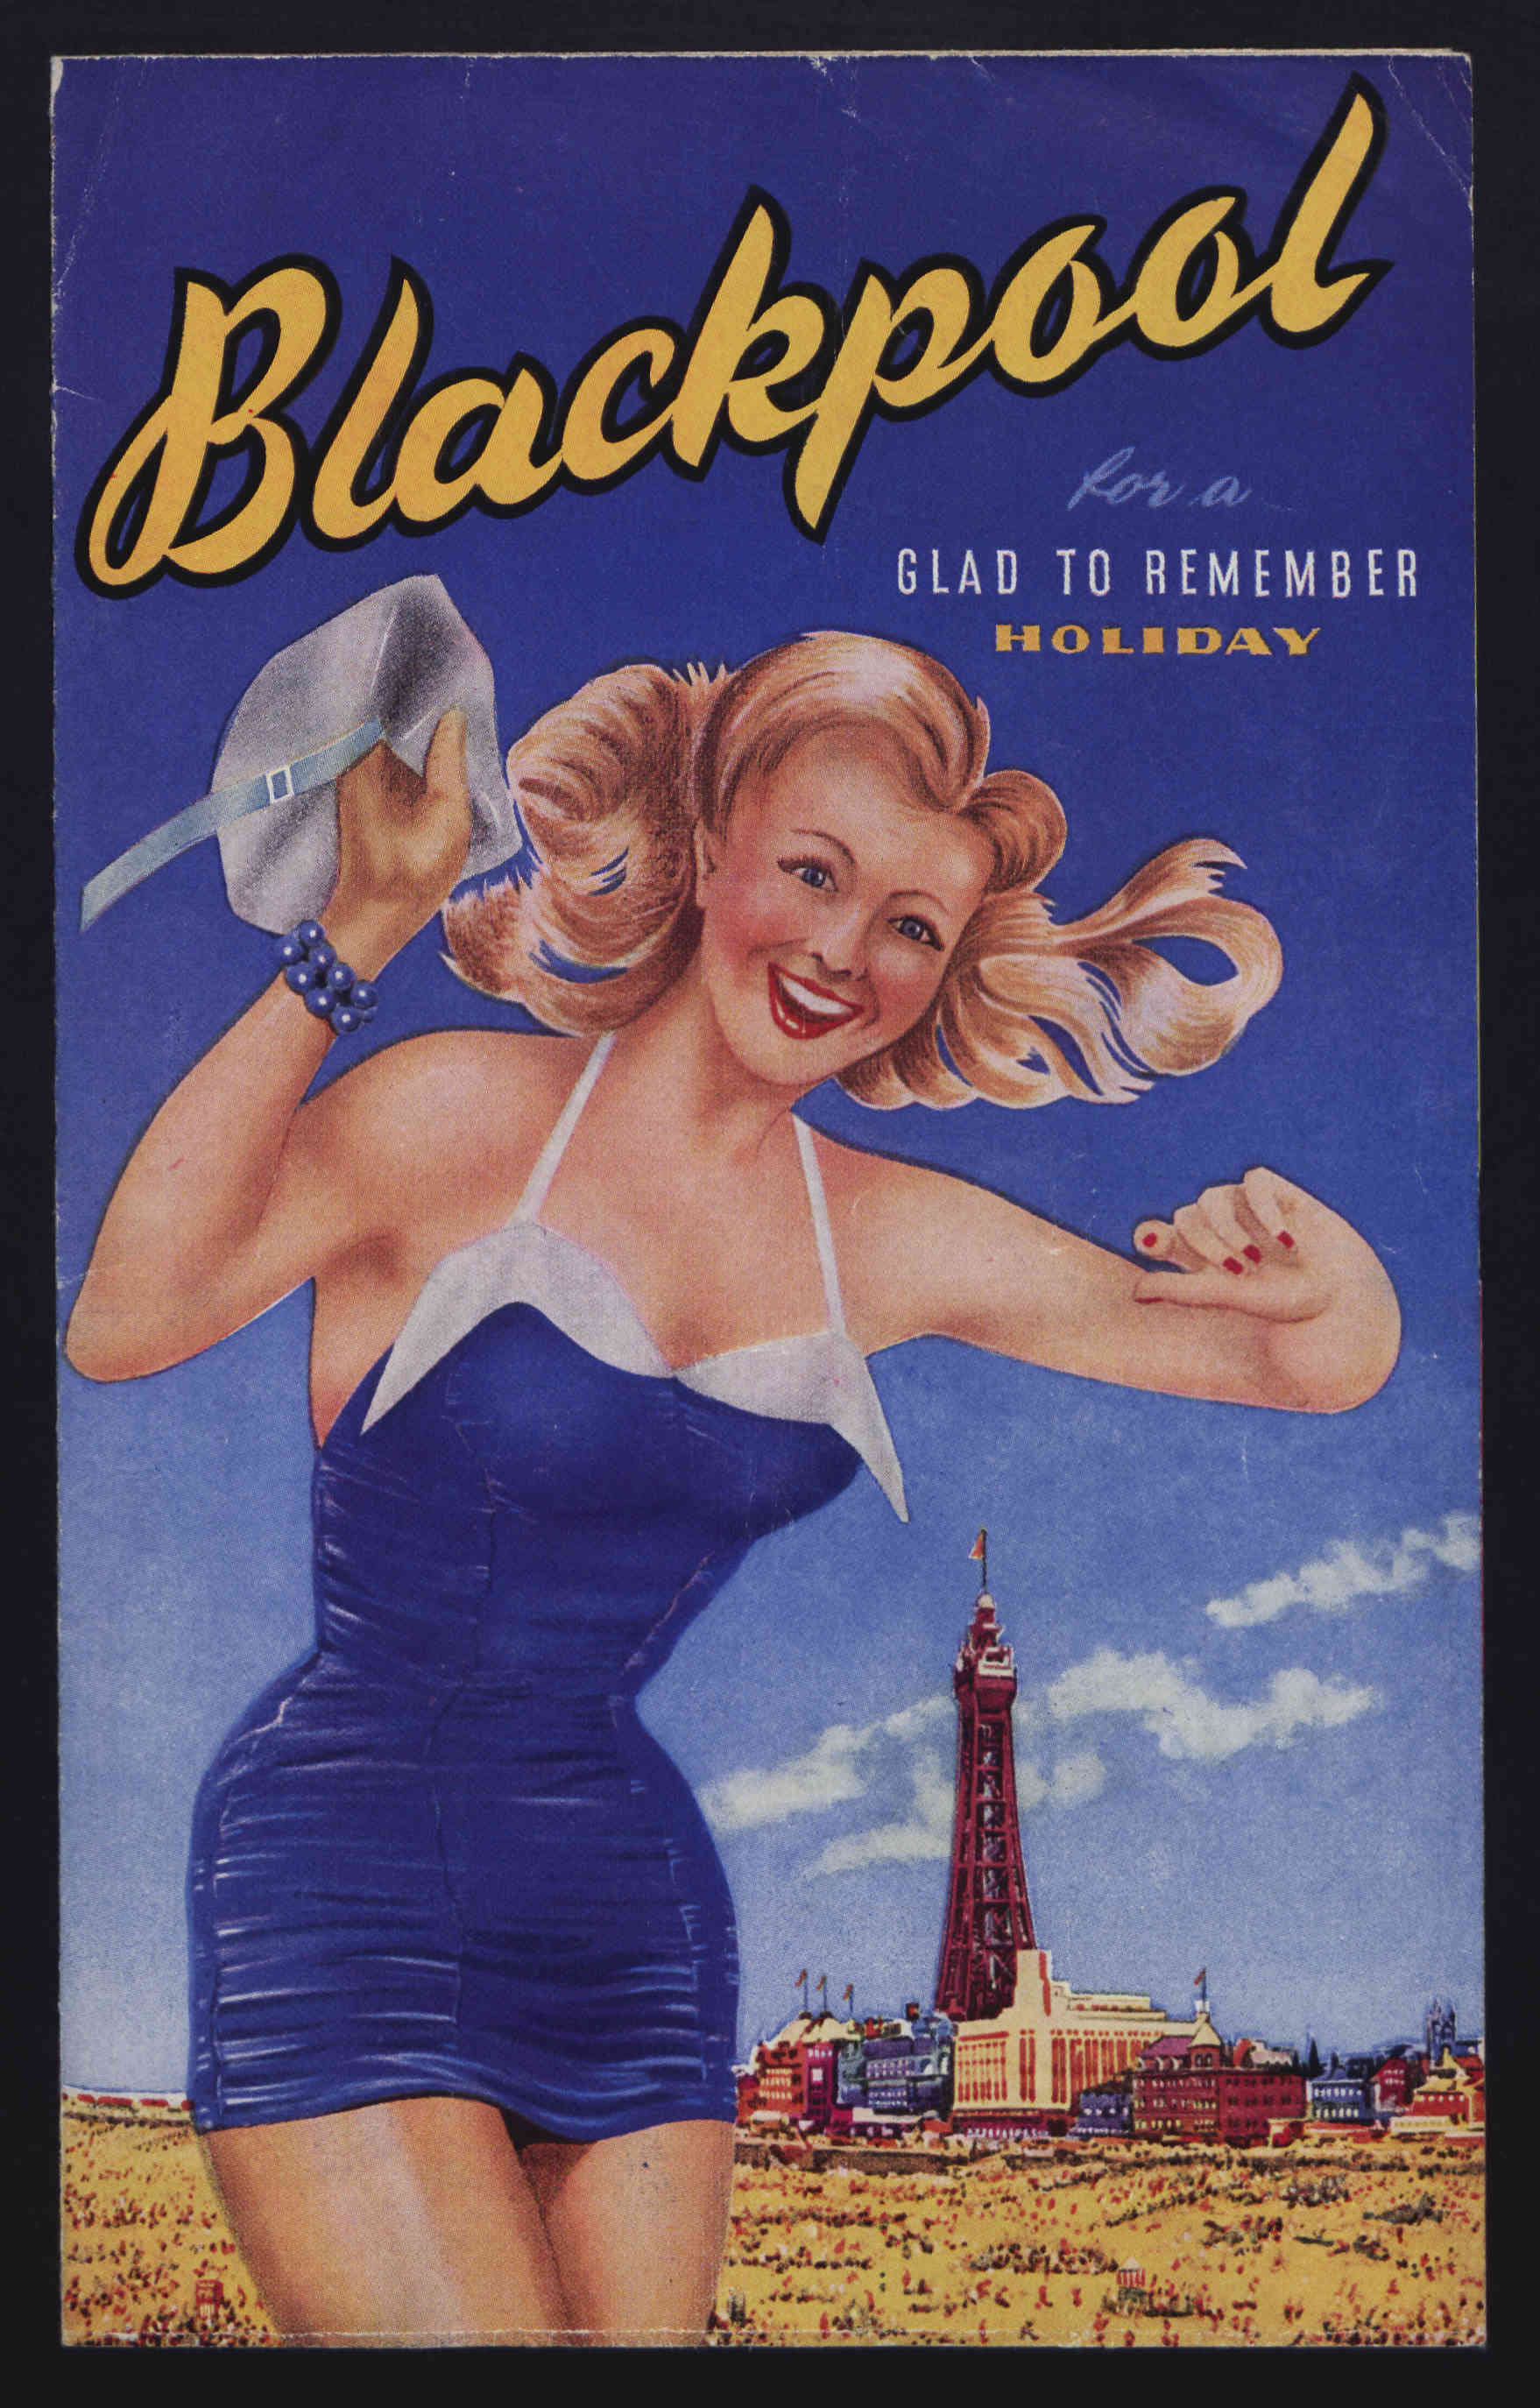 Blackpool for a Glad to Remember Holiday. Copyright Tourism Collection, Local and Family History Centre, Blackpool Central Library